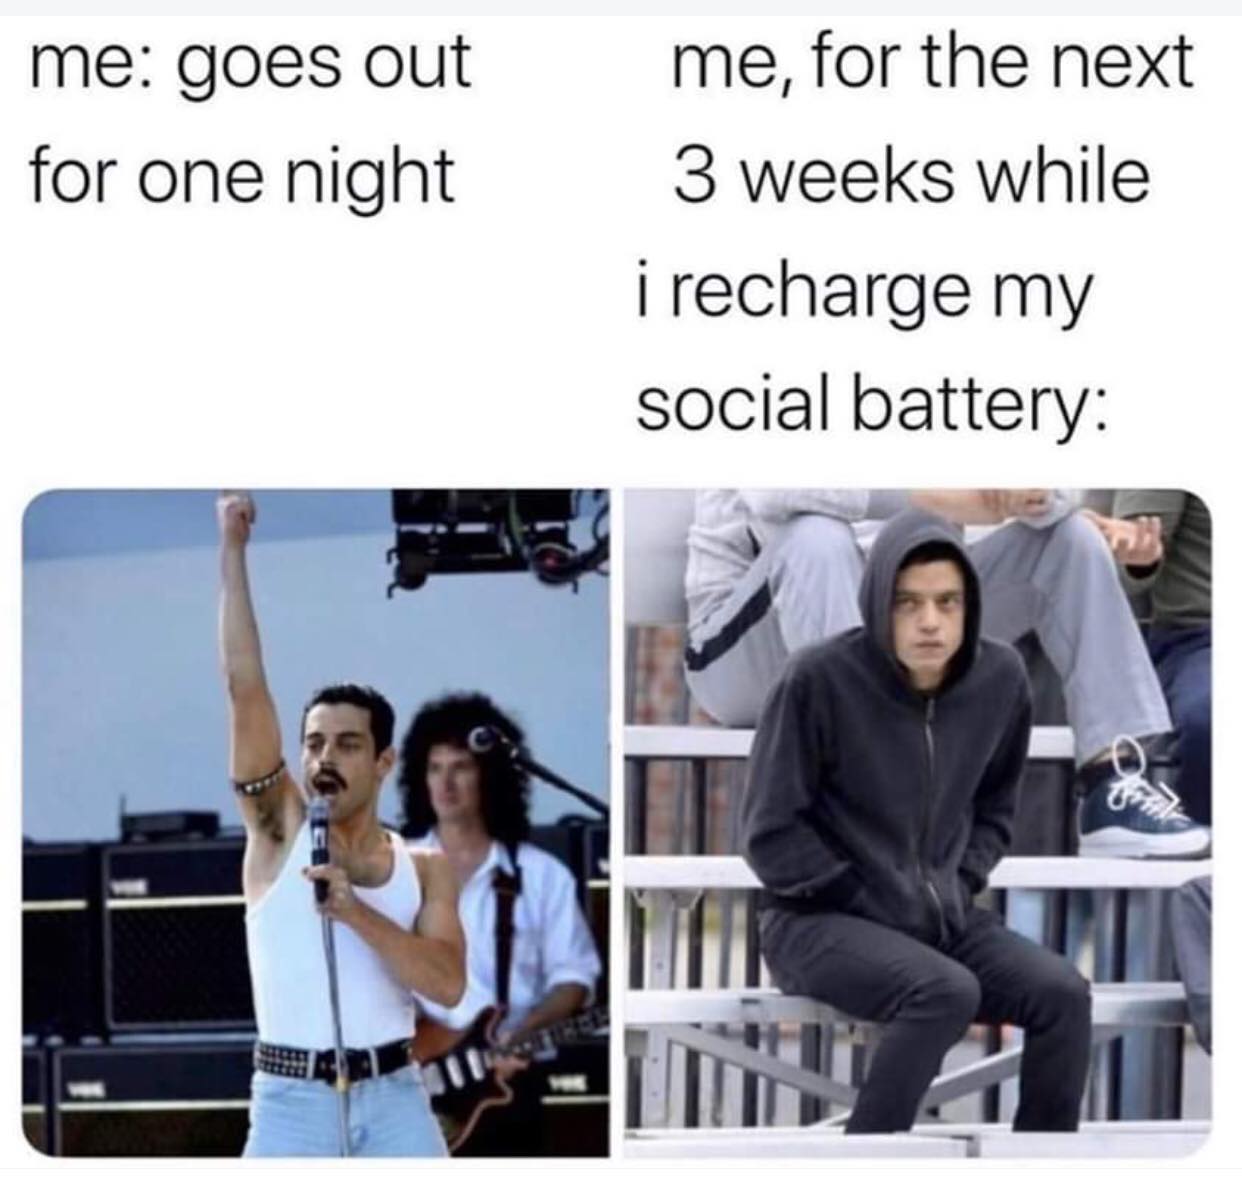 me goes out for one night - me goes out for one night me, for the next 3 weeks while i recharge my social battery